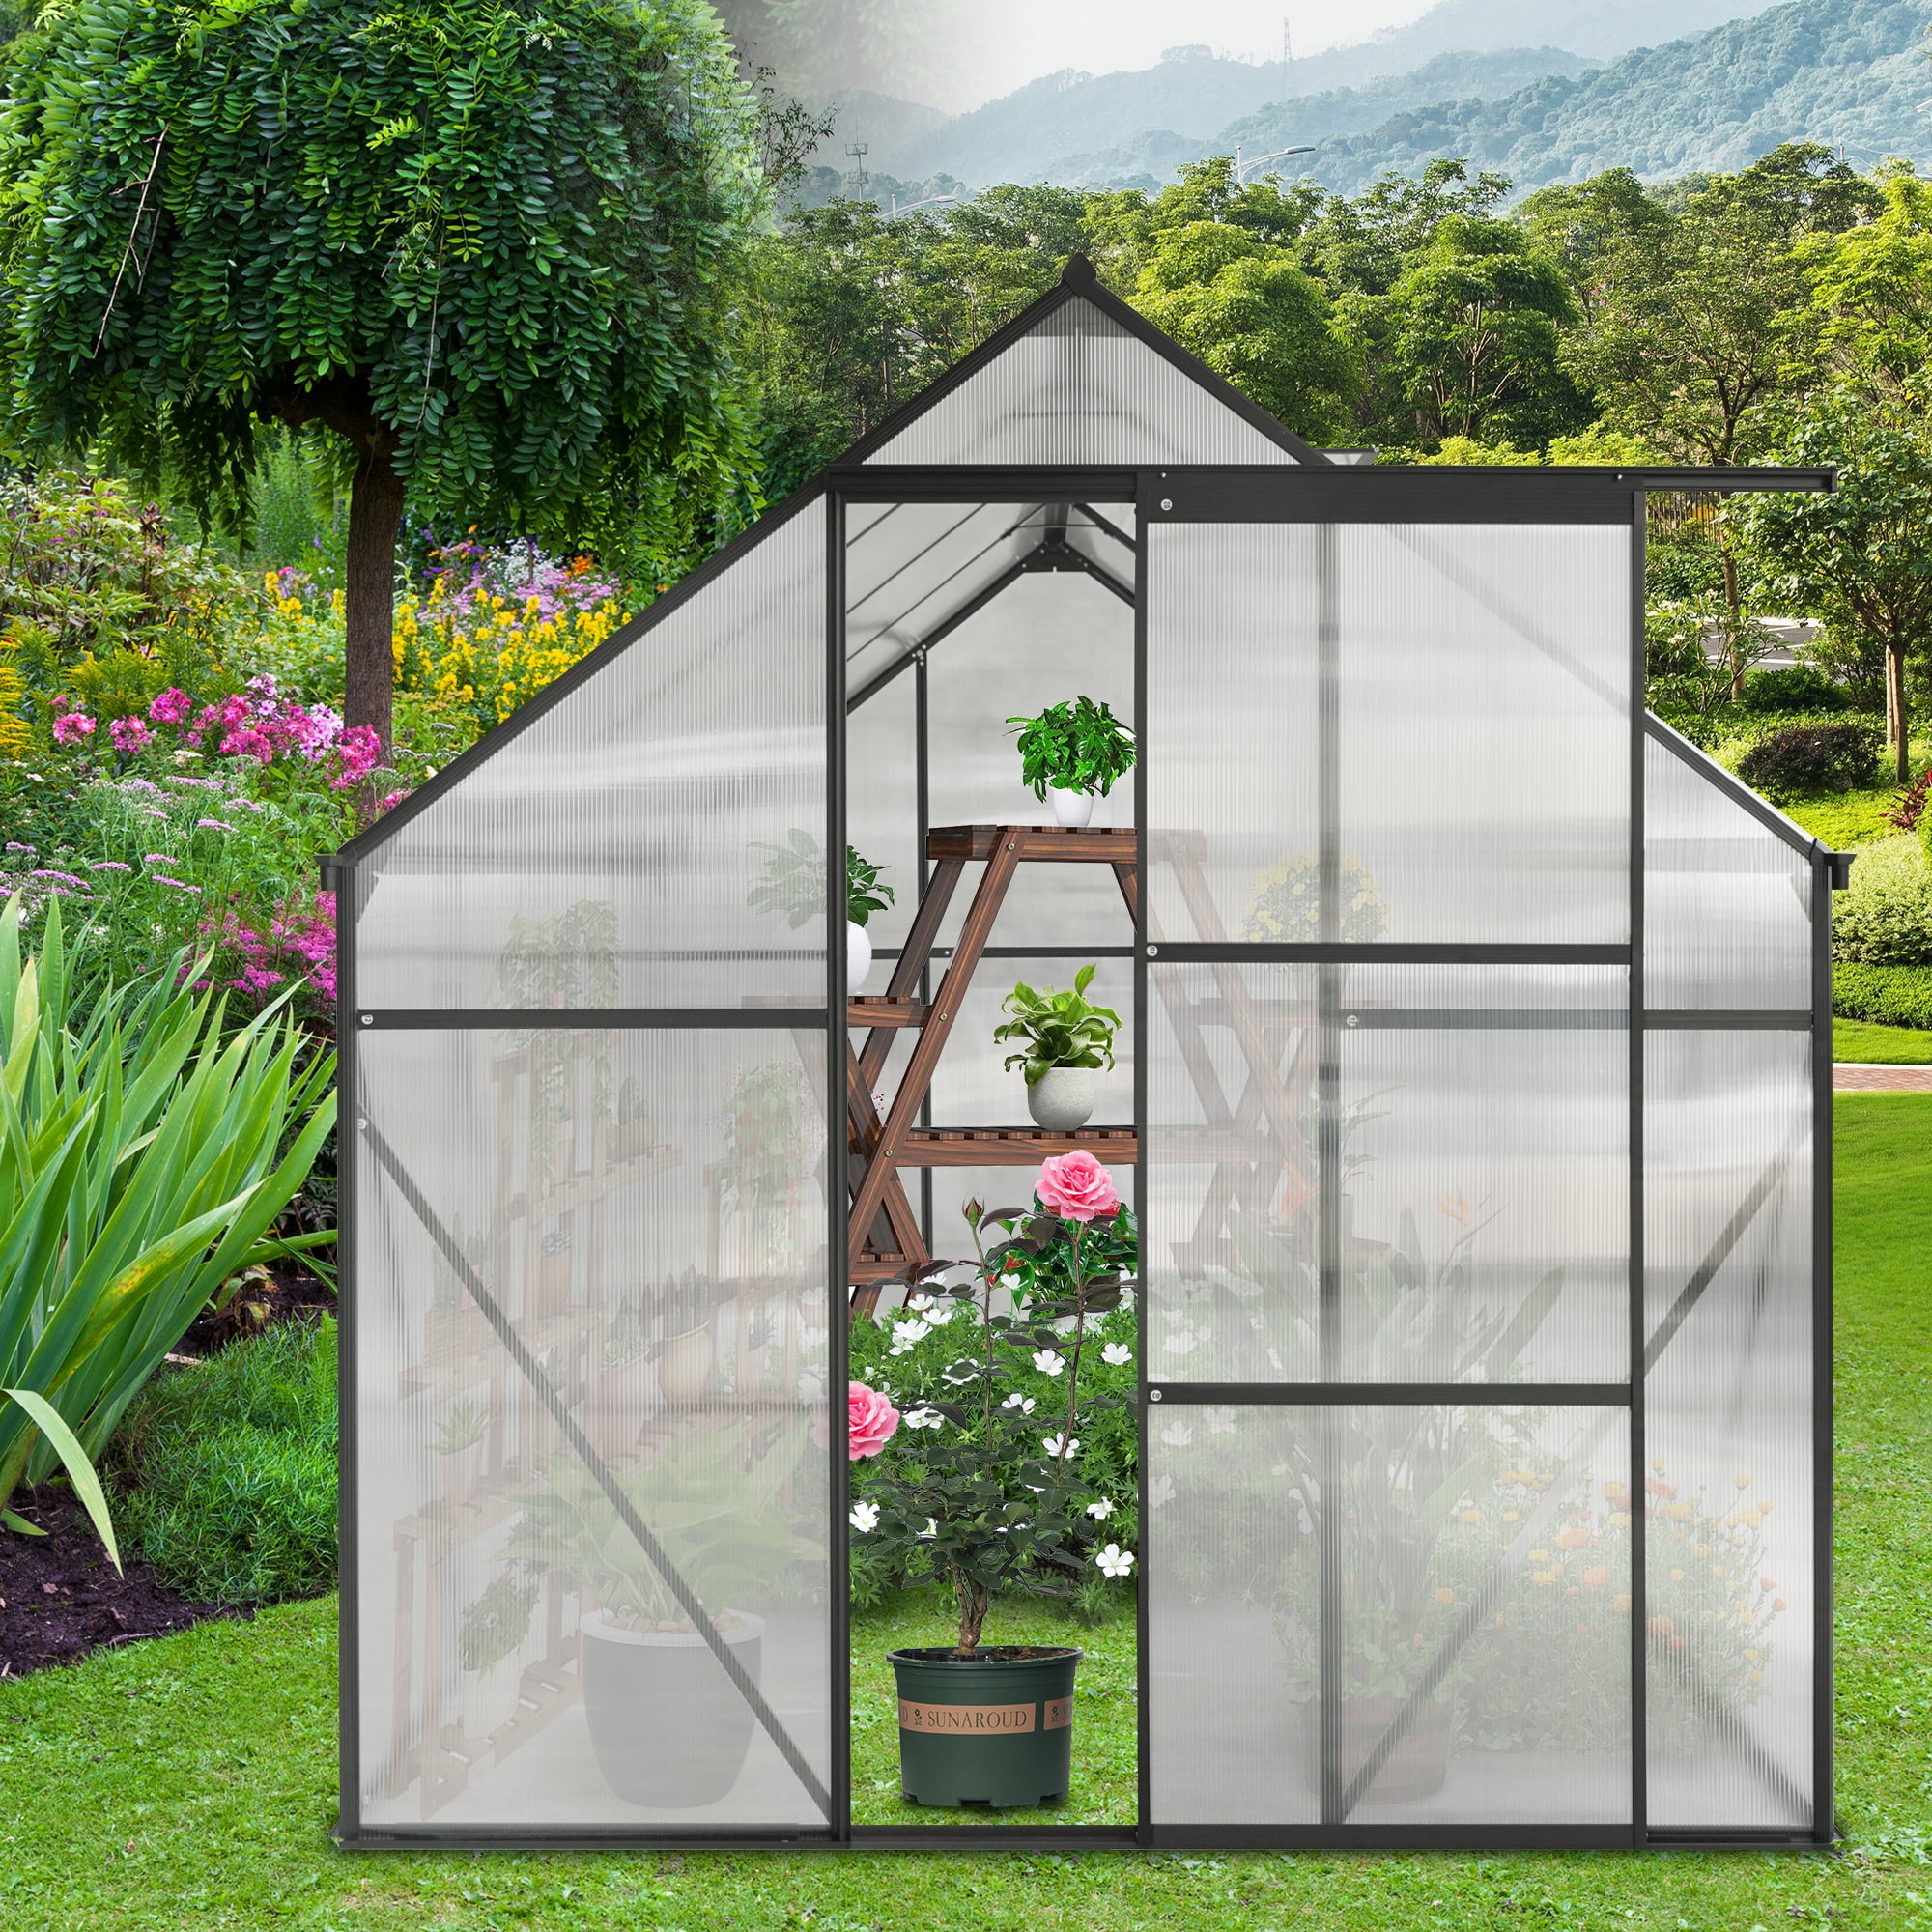 SESSLIFE Outdoor Garden Greenhouse, Walk in Polycarbonate Greenhouse, 62.2'  x 6.2' x 6.6' Greenhouse with Sliding Door and Rain Gutter, Aluminum Frame  Grow House, TE2459 